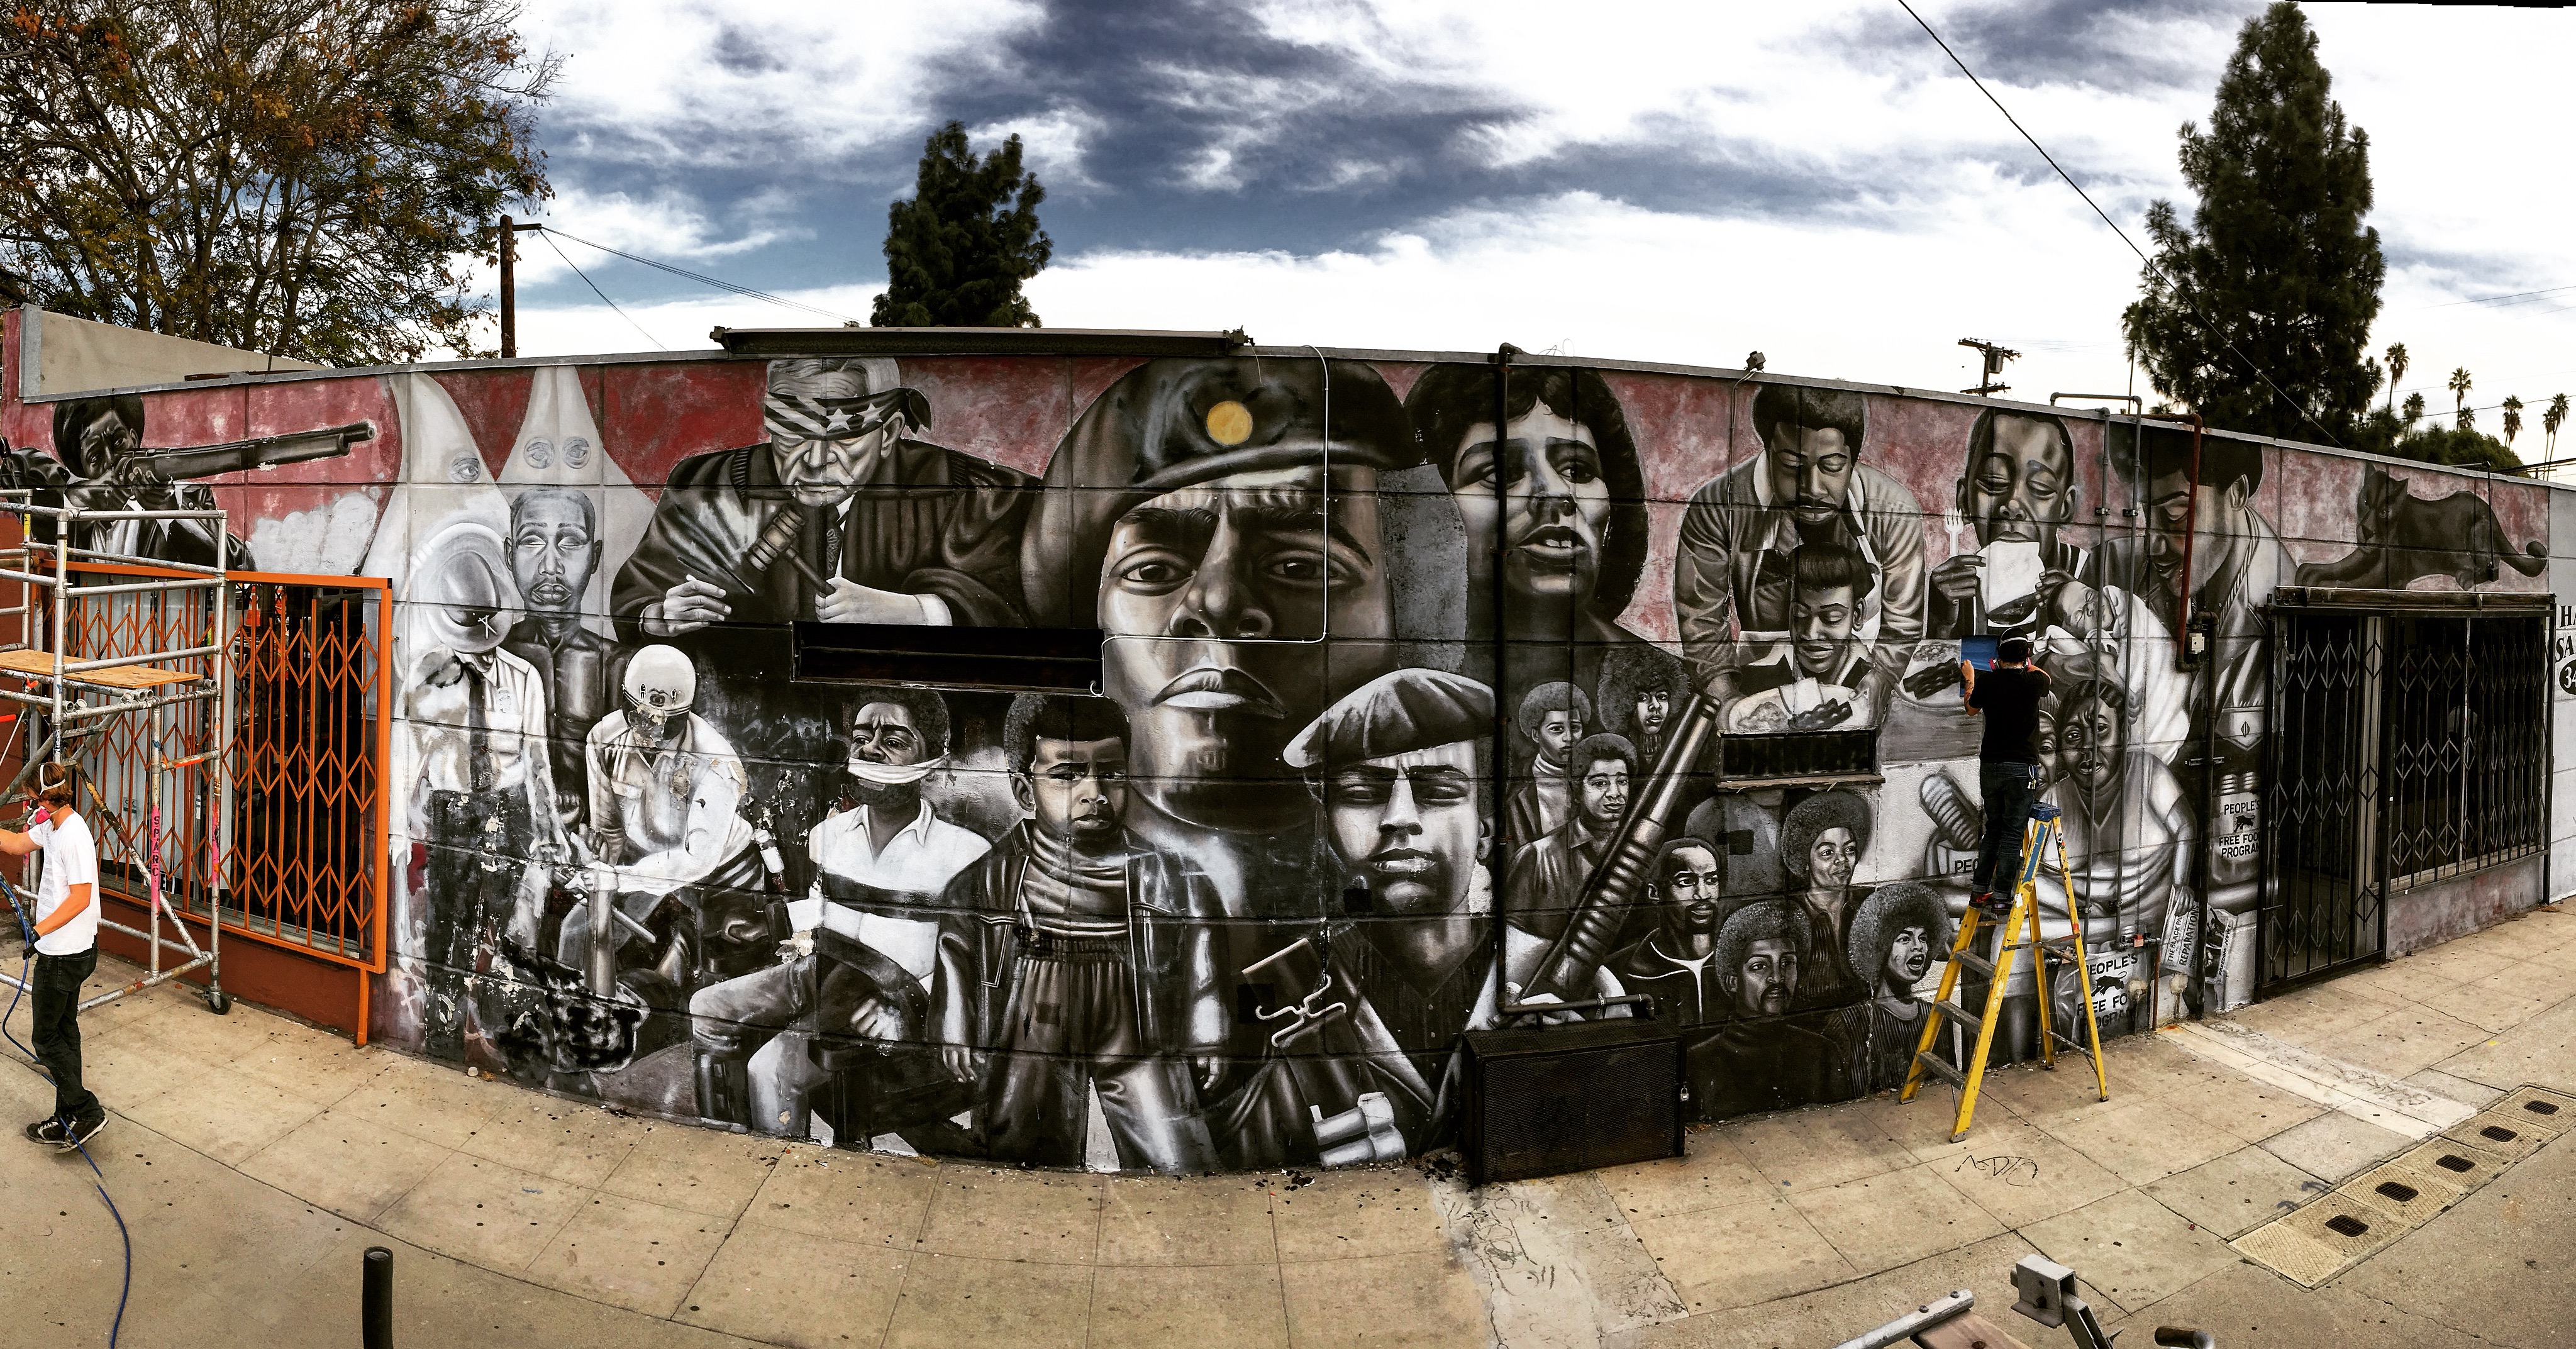 From South LA to Venice Beach, SPARC is restoring history…